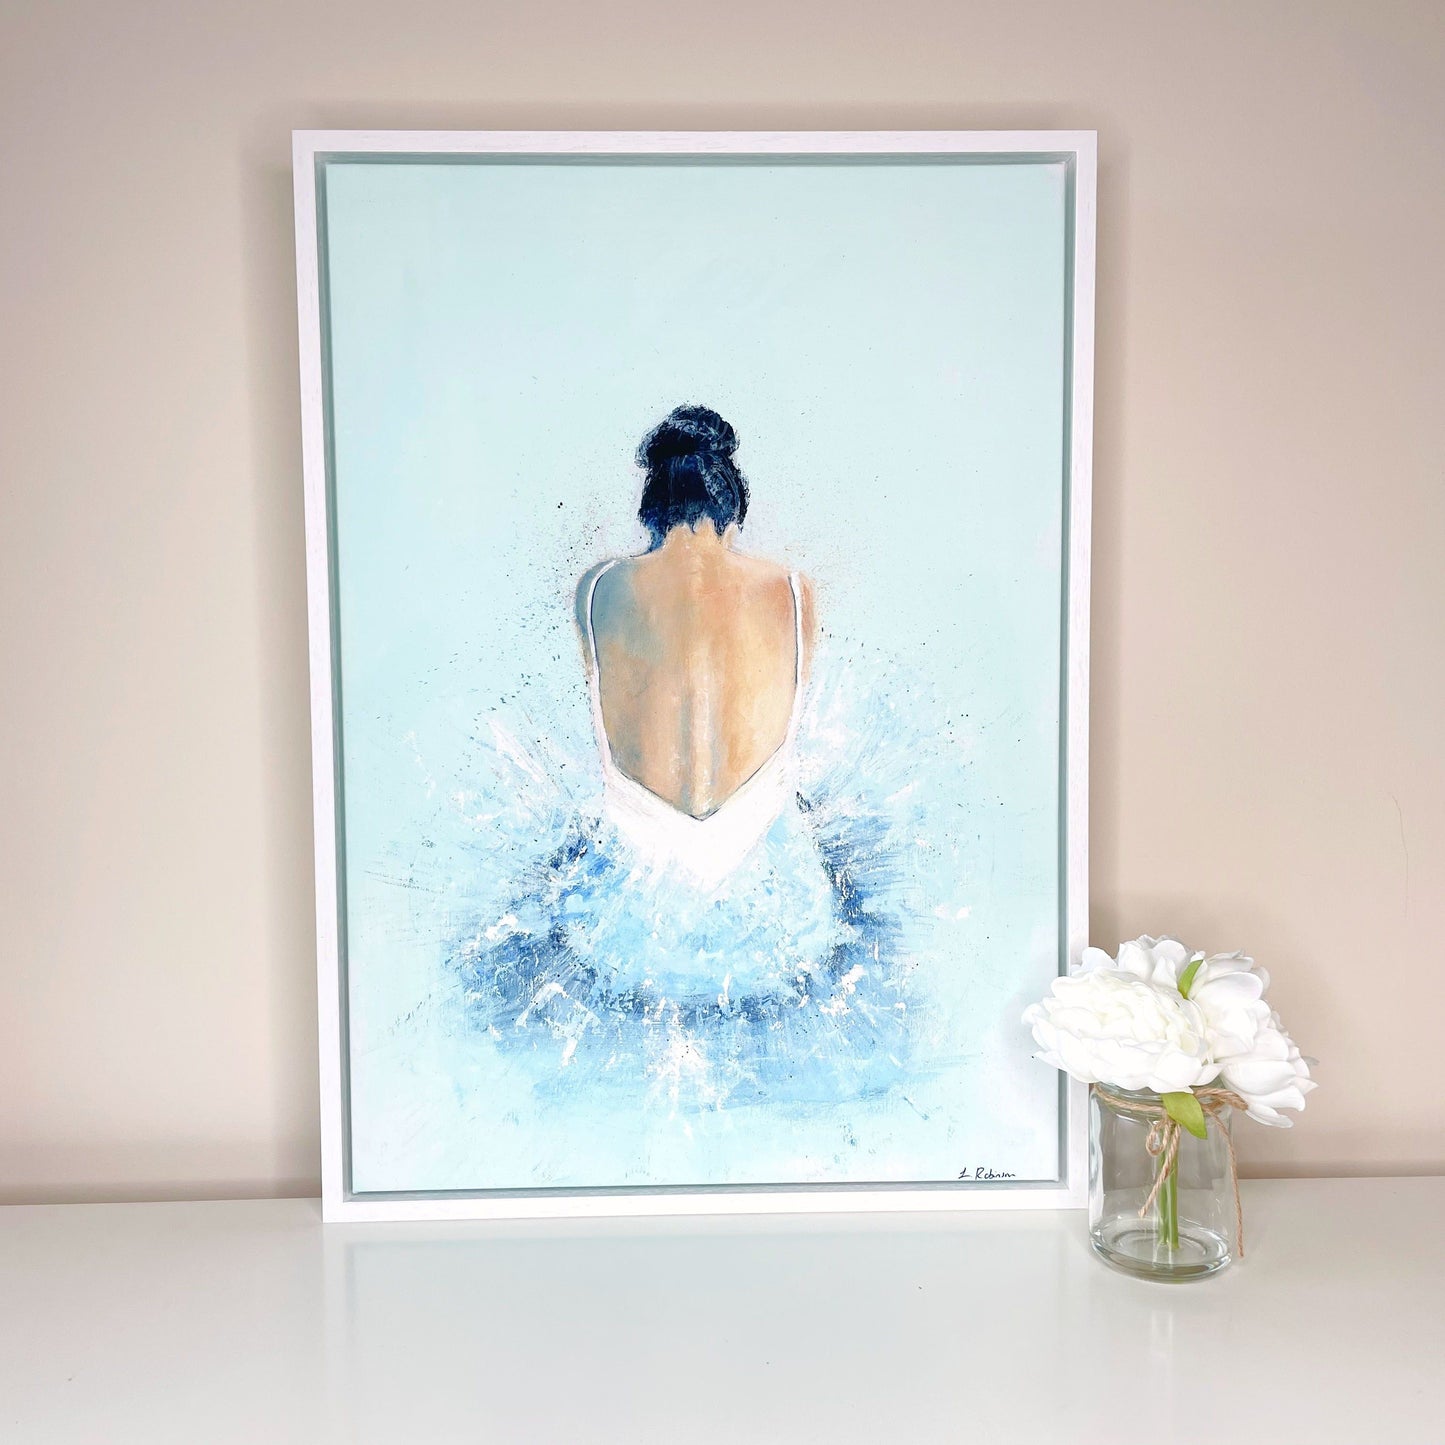 A2 Canvas Print of an acrylic painting of a ballerina painted in blue. Framed in a white wooden frame.